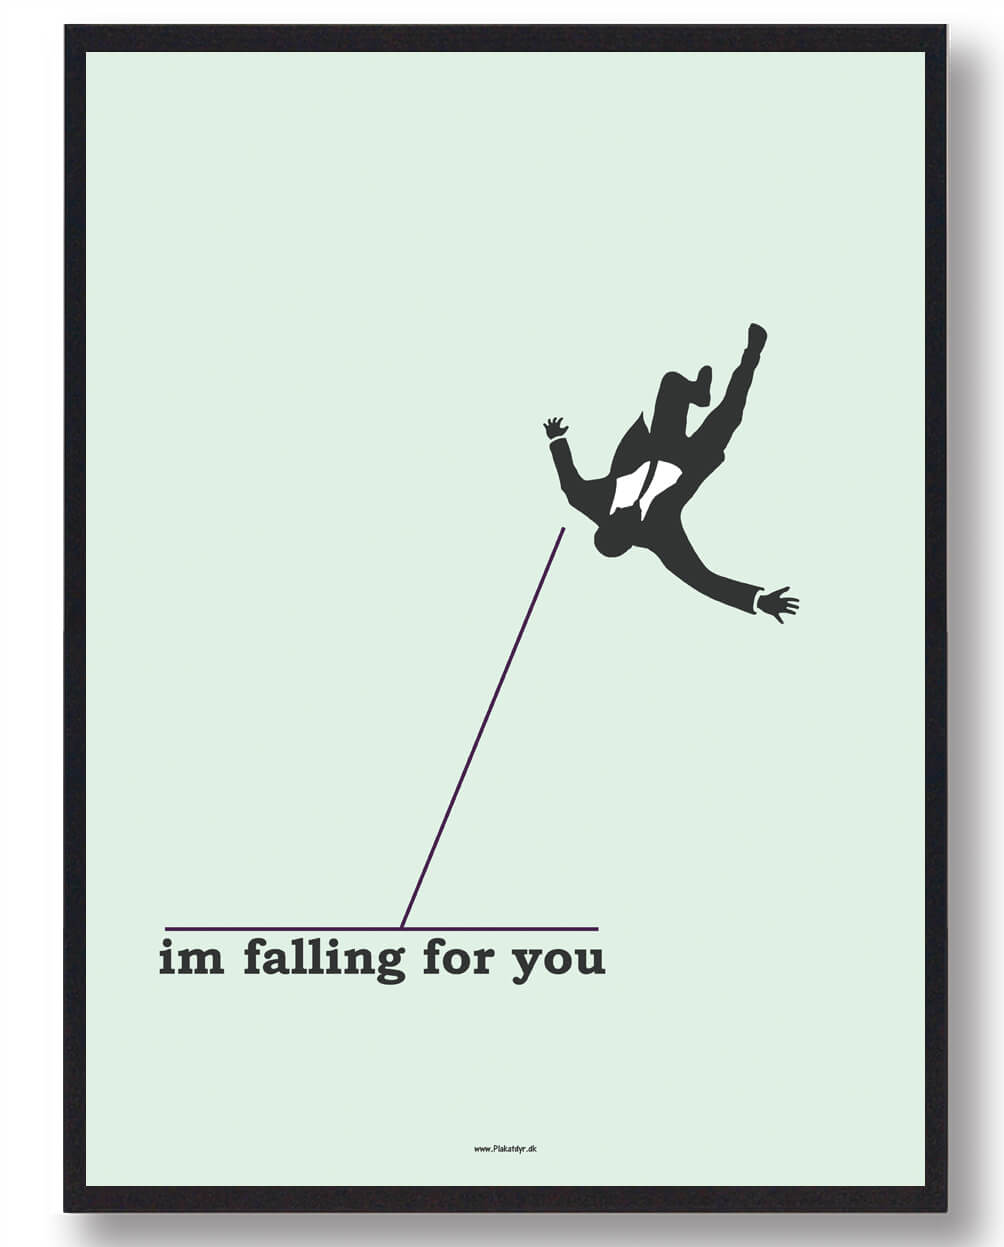 Im falling for you - plakat